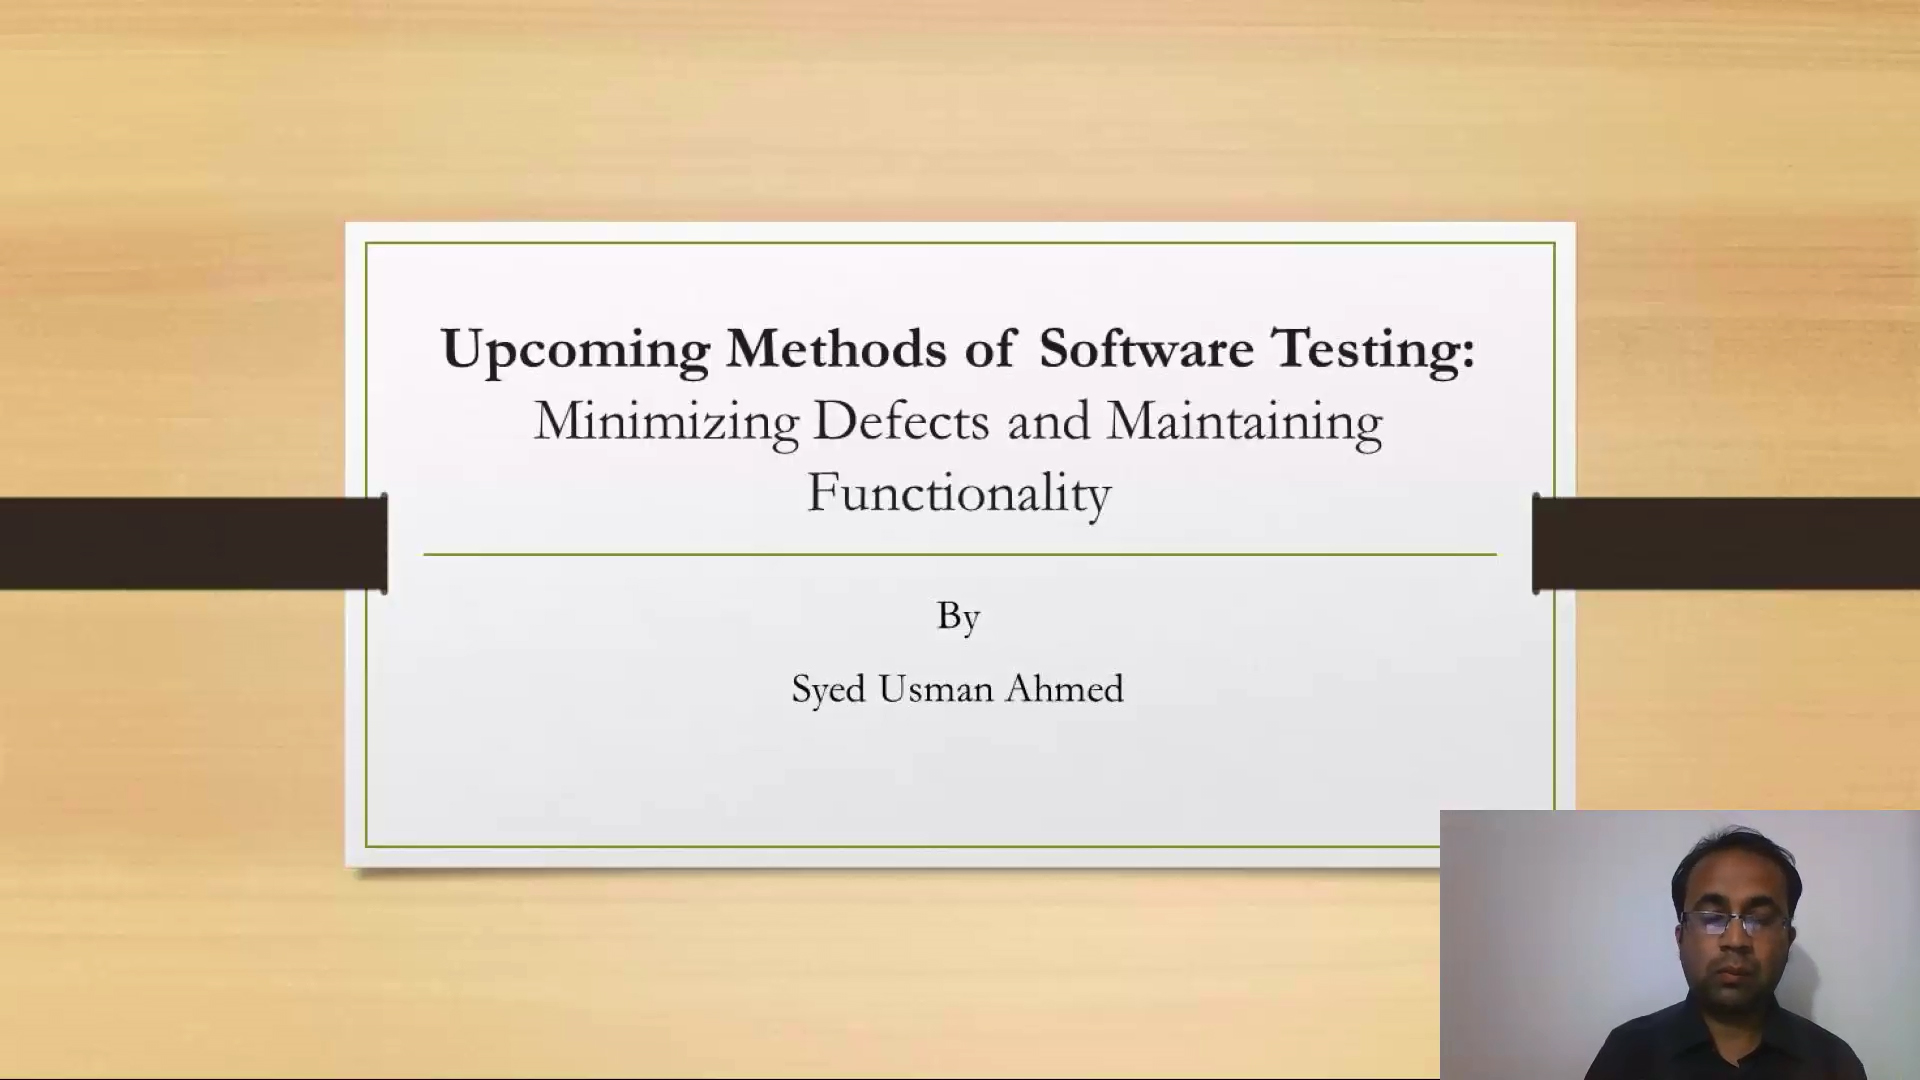 Upcoming Methods of Software Testing: Minimizing Defects and Maintaining Functionality